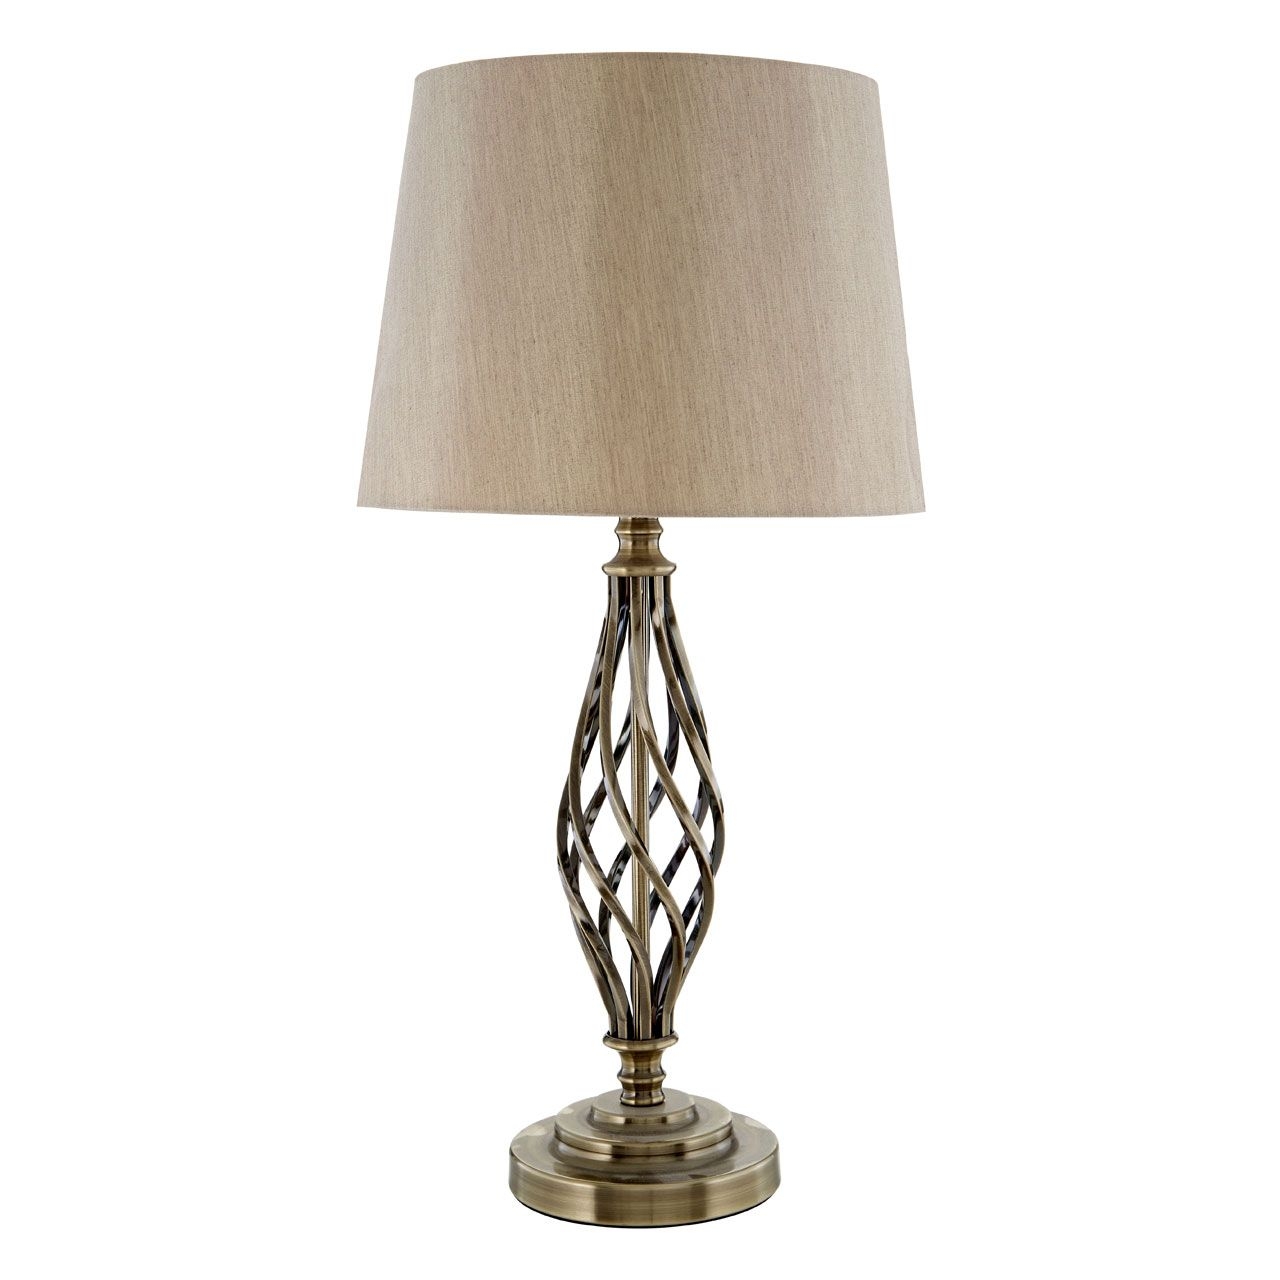 Jakinda Natural Fabric Shade Table Lamp With Antique Brass Base